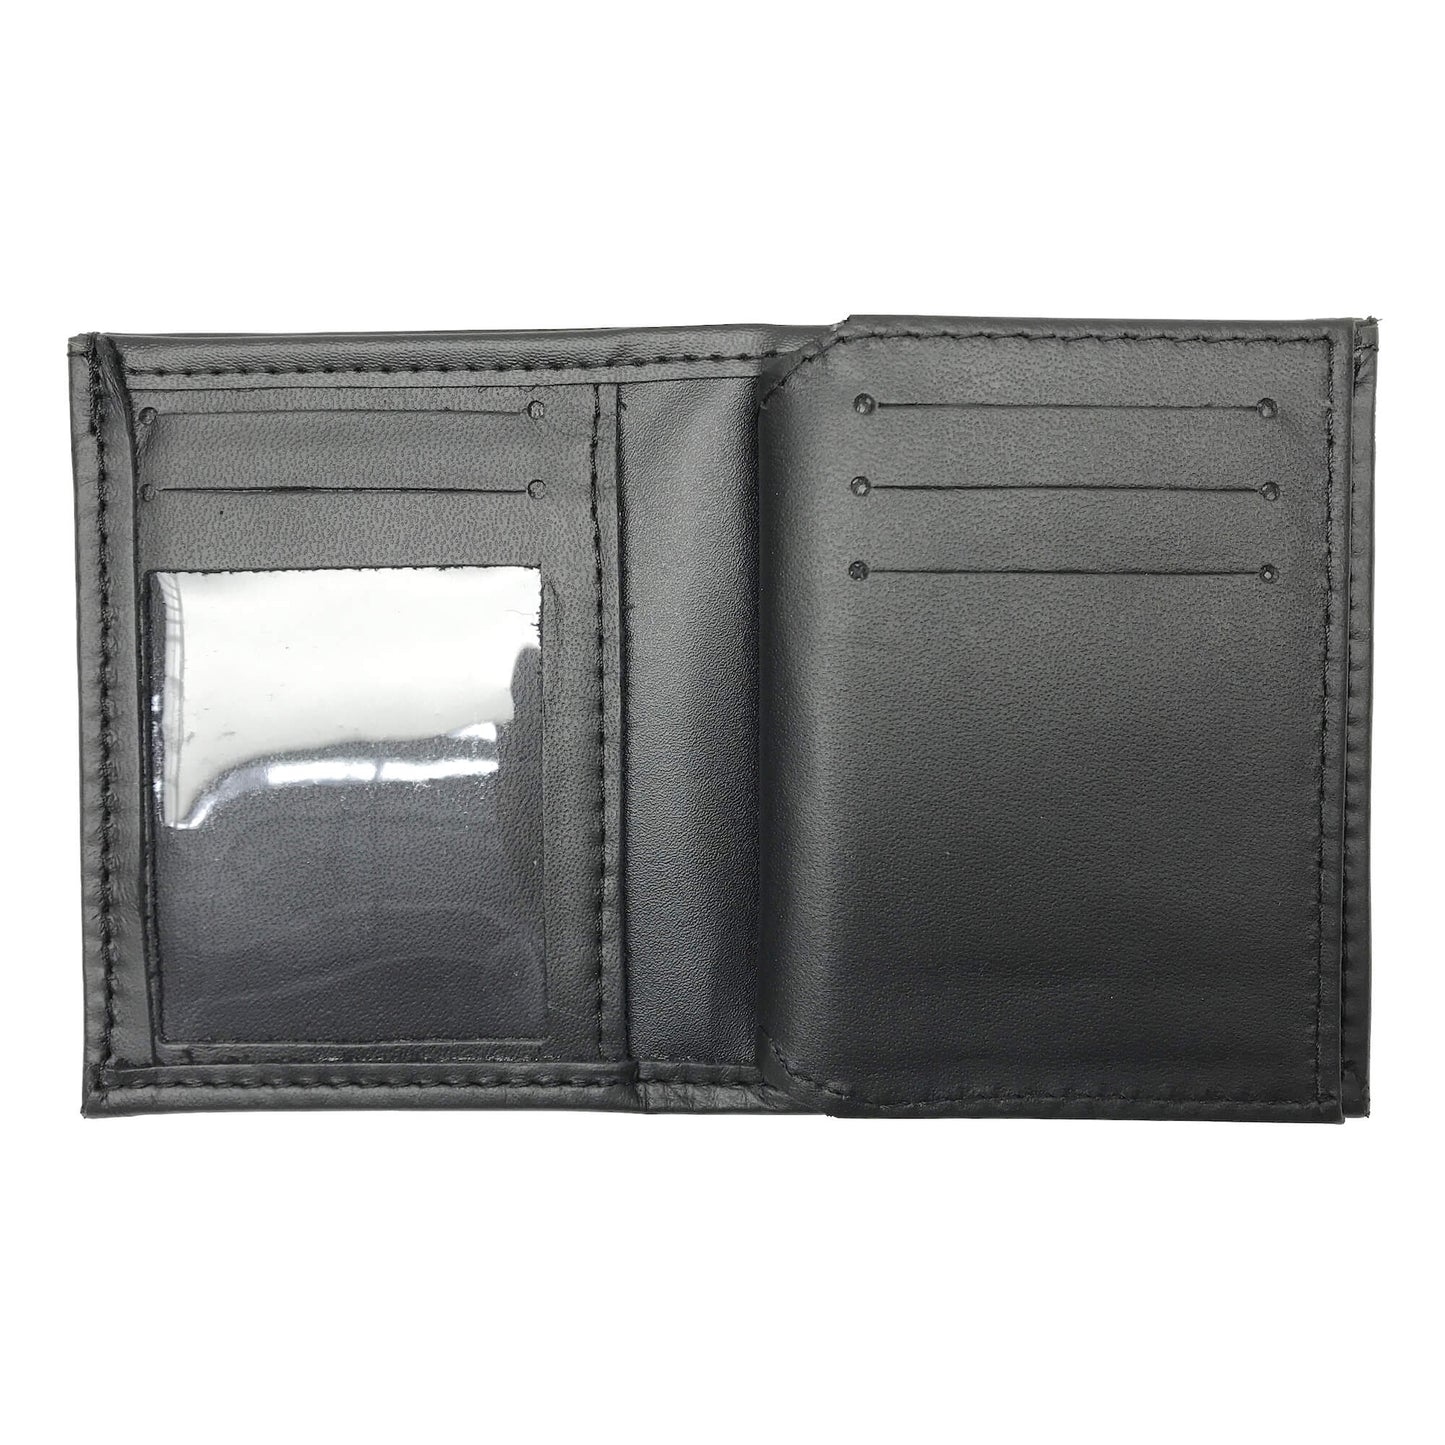 New York Police Department (NYPD) Sergeant Bifold Hidden Badge Wallet-Perfect Fit-911 Duty Gear USA